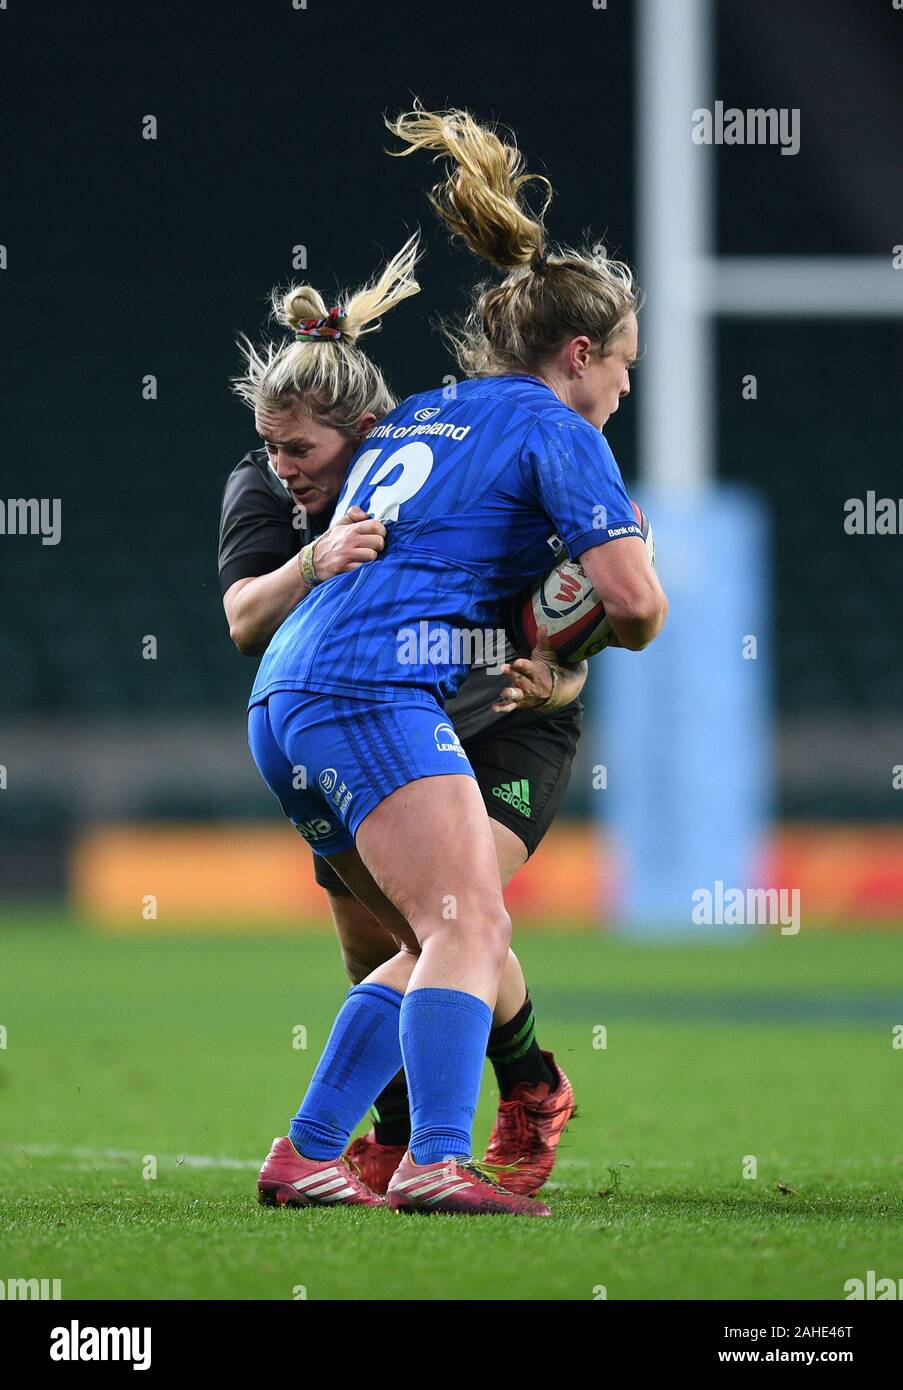 Twickenham, London, UK. 28th Dec, 2019. Big Game 12 Womens Rugby, Harlequins versus Leinster; Rachael Burford of Harlequins tackles Elise O'Byrne-White of Leinster - Editorial Use Credit: Action Plus Sports/Alamy Live News Stock Photo